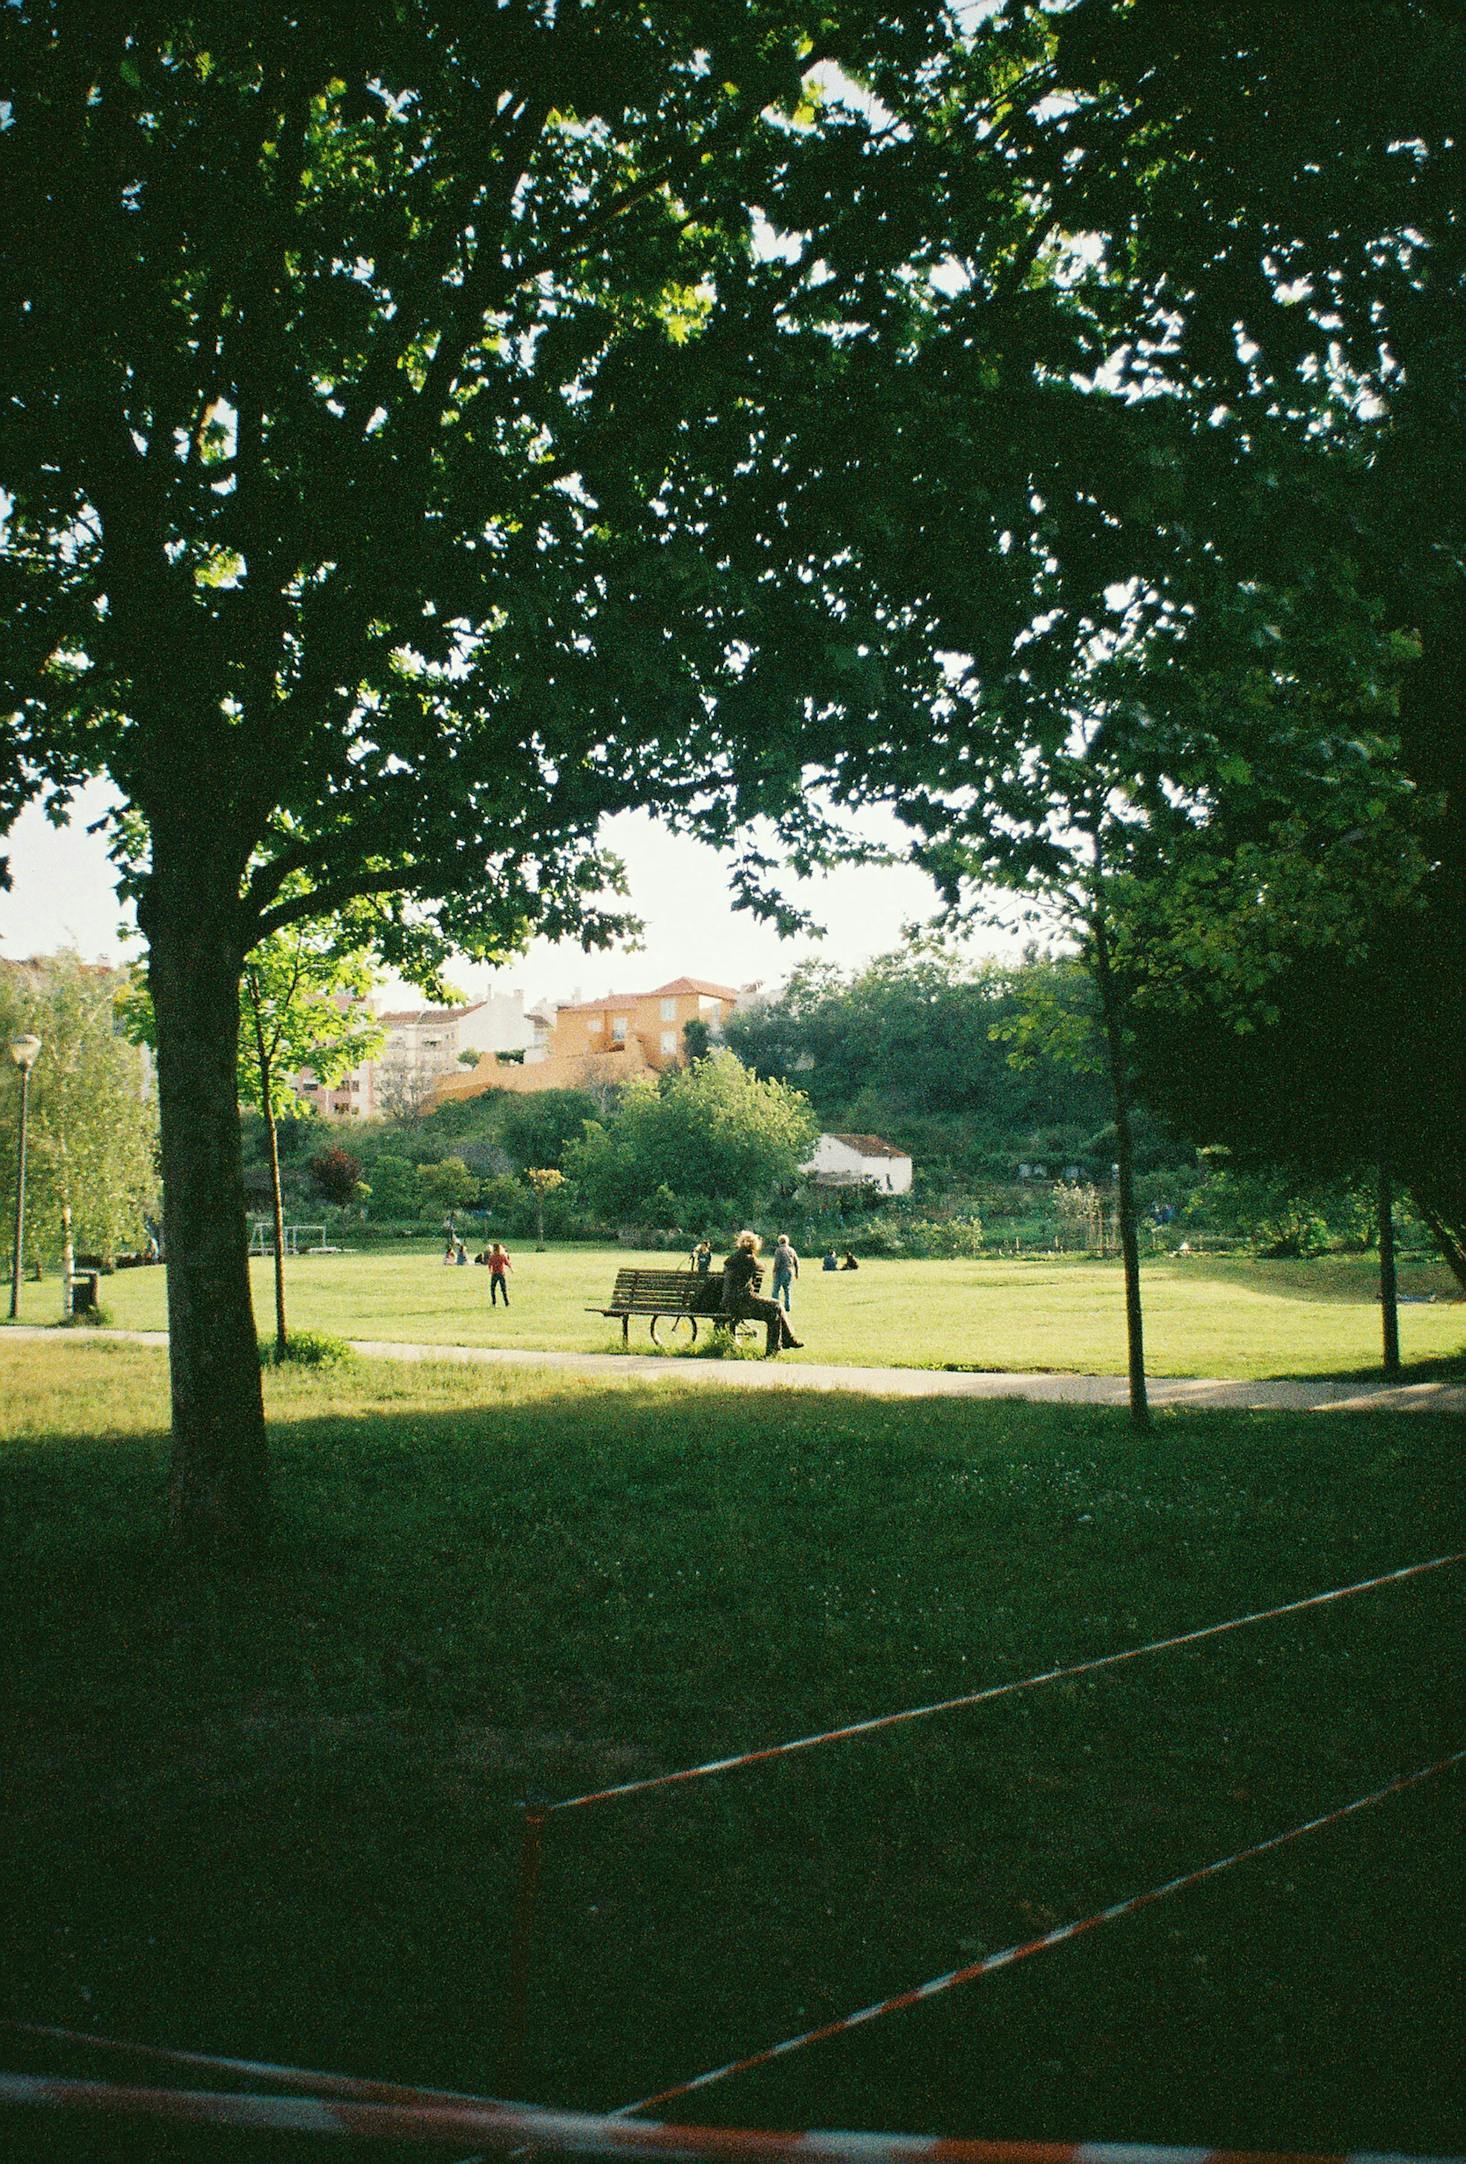 Looking through a shaded canopy of trees toward a person on a park bench